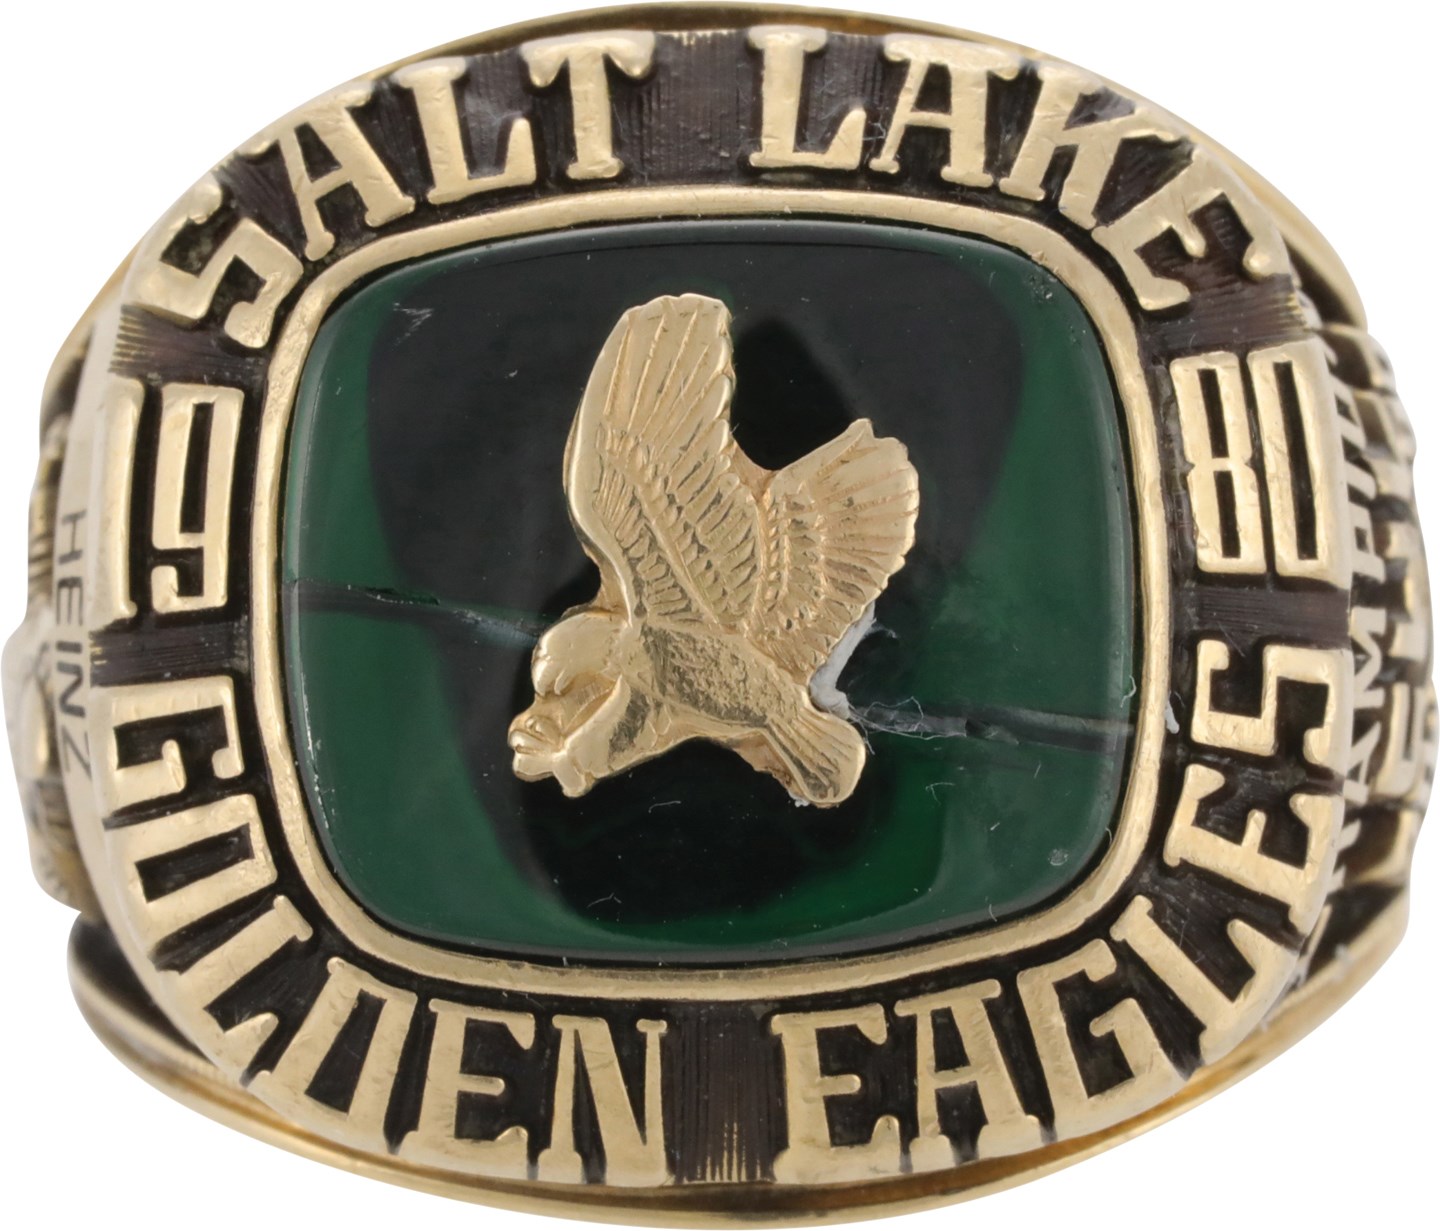 Sports Rings And Awards - 1979-80 Salt Lake Golden Eagles Central Hockey League Championship Player Ring (Heinz LOA)